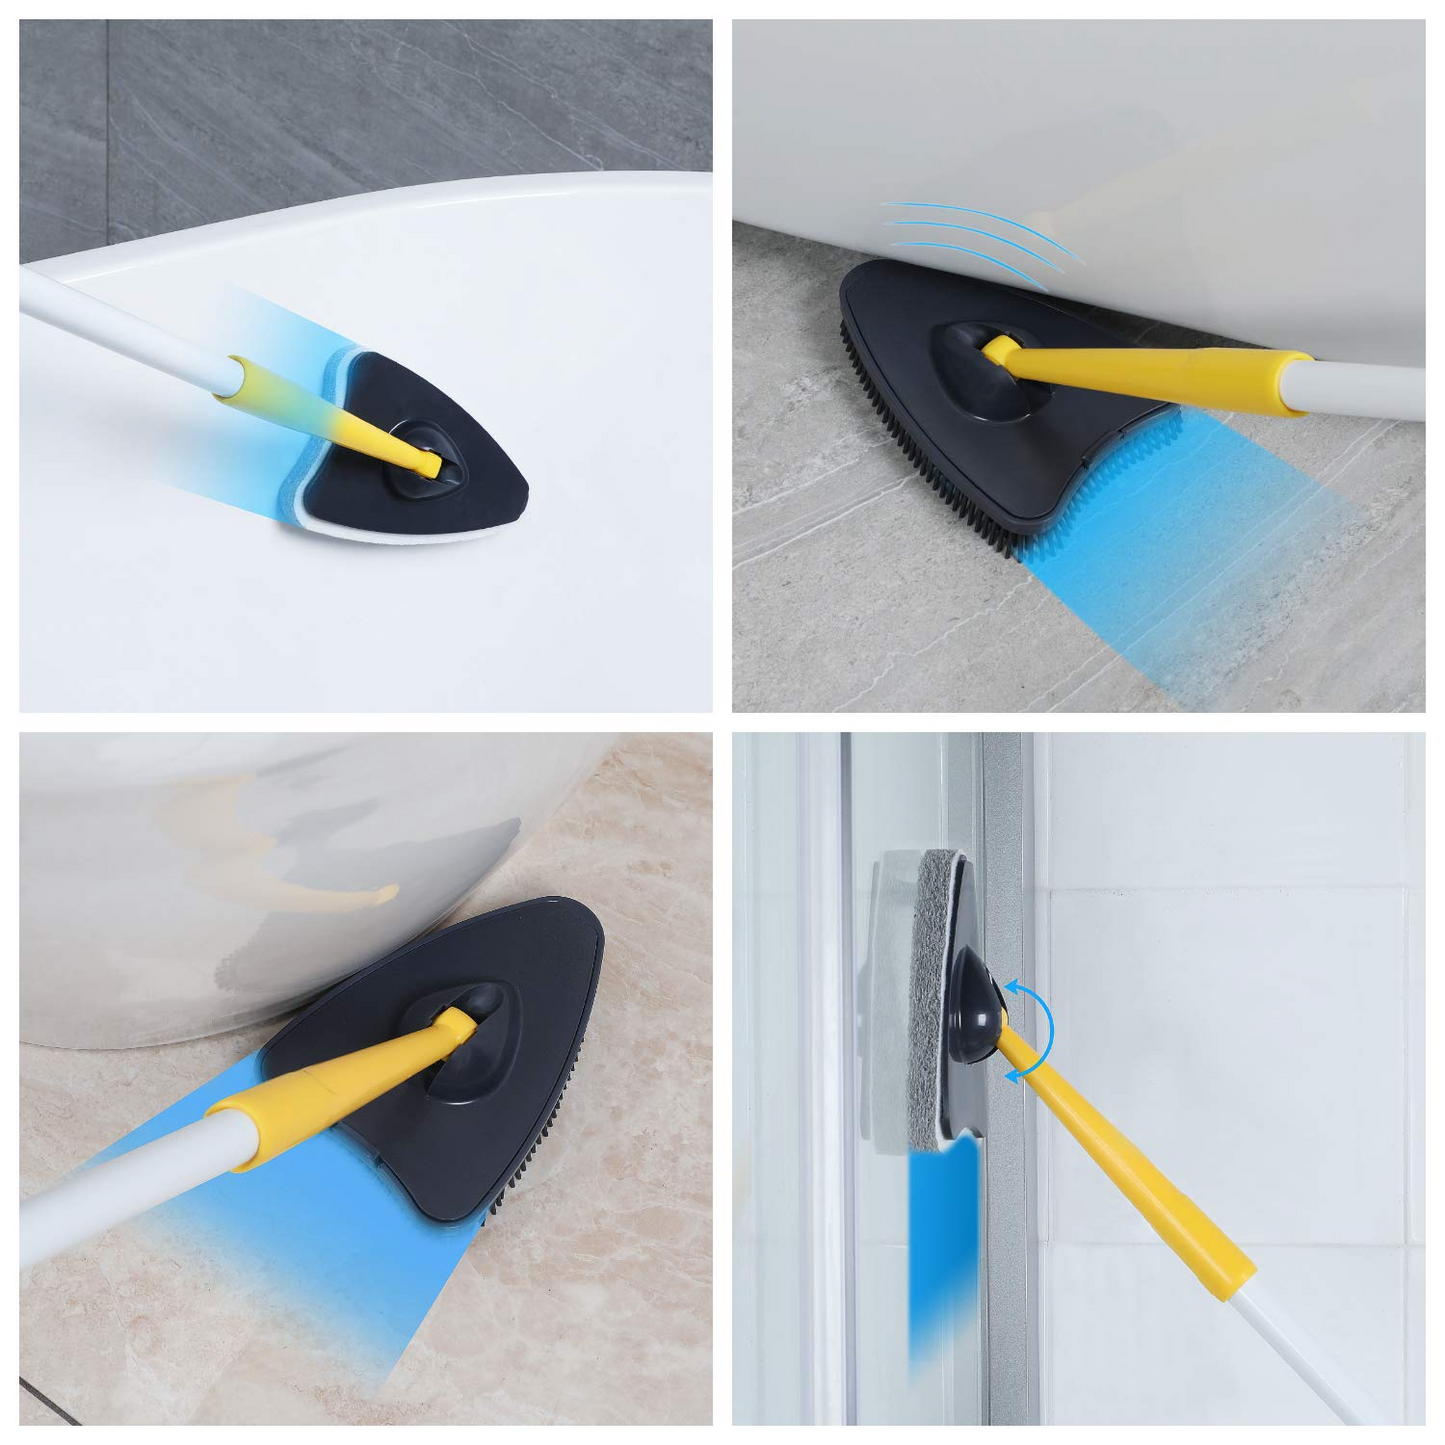 Yocada Tub Tile Scrubber Brush with 2 Scouring Pads 1 TPR Brush Head No Scratch for Cleaning Bathroom Kitchen Toilet Wall Tub Tile Sink